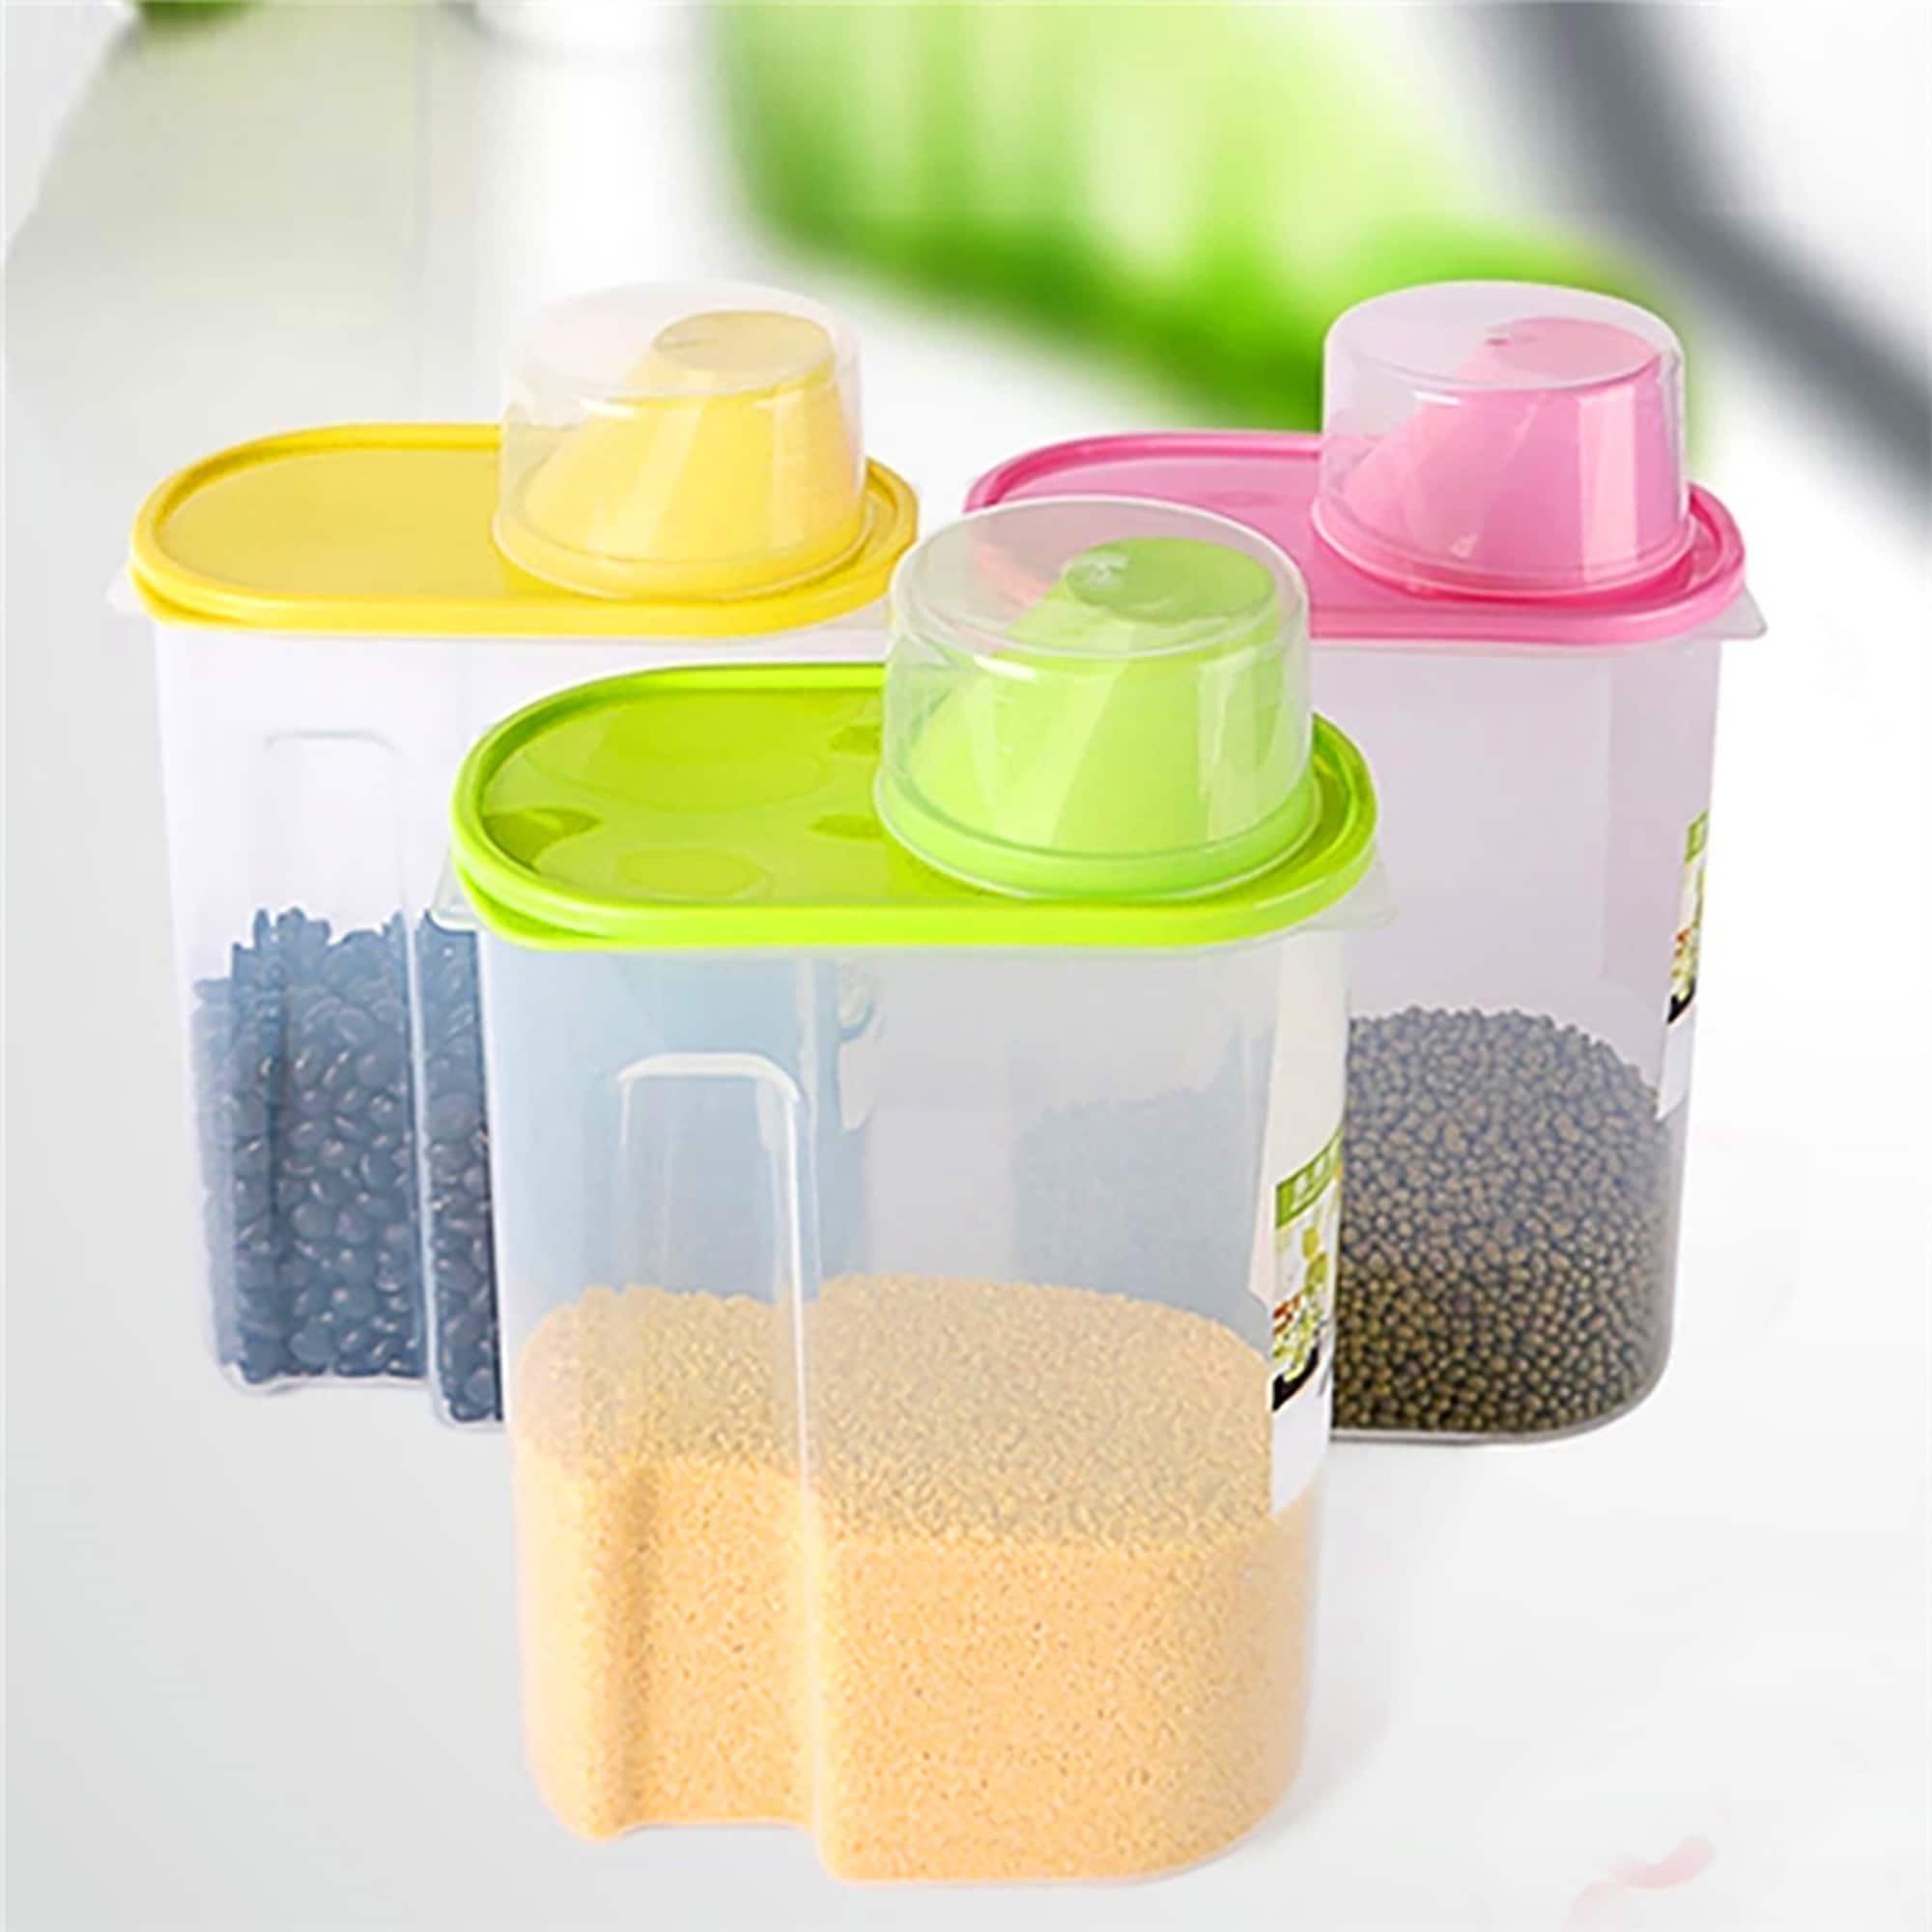 https://ak1.ostkcdn.com/images/products/is/images/direct/1f80d73aa7f2a17254d7a732d598991a33382938/Basicwise-Green-Clear-BPA-free-Plastic-Food-Saver-Kitchen-Food-Cereal-Storage-Containers.jpg